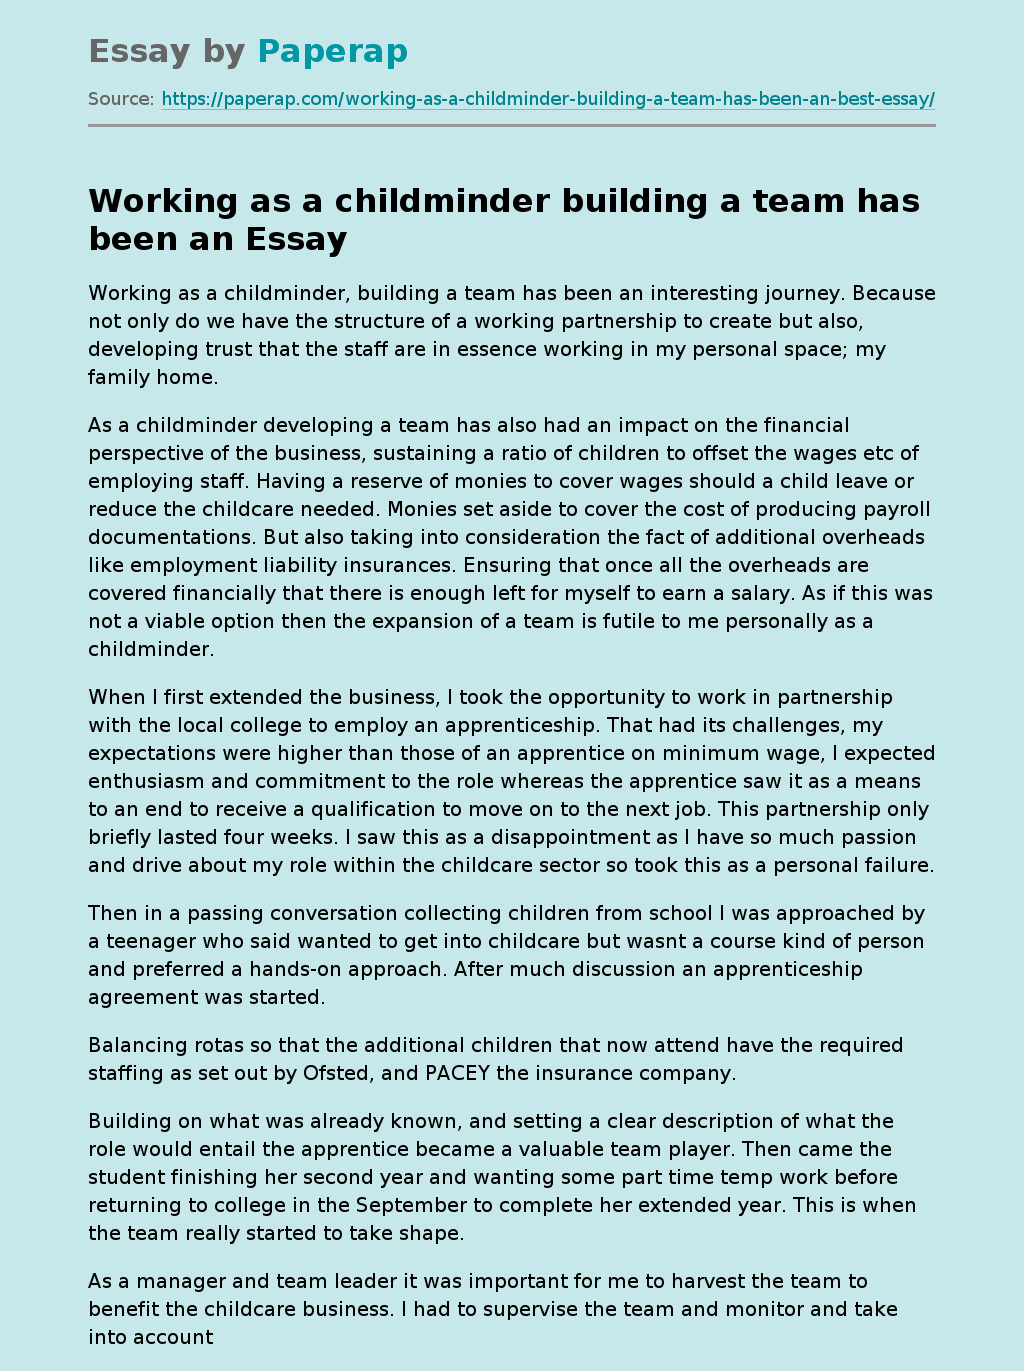 Working as a childminder building a team has been an